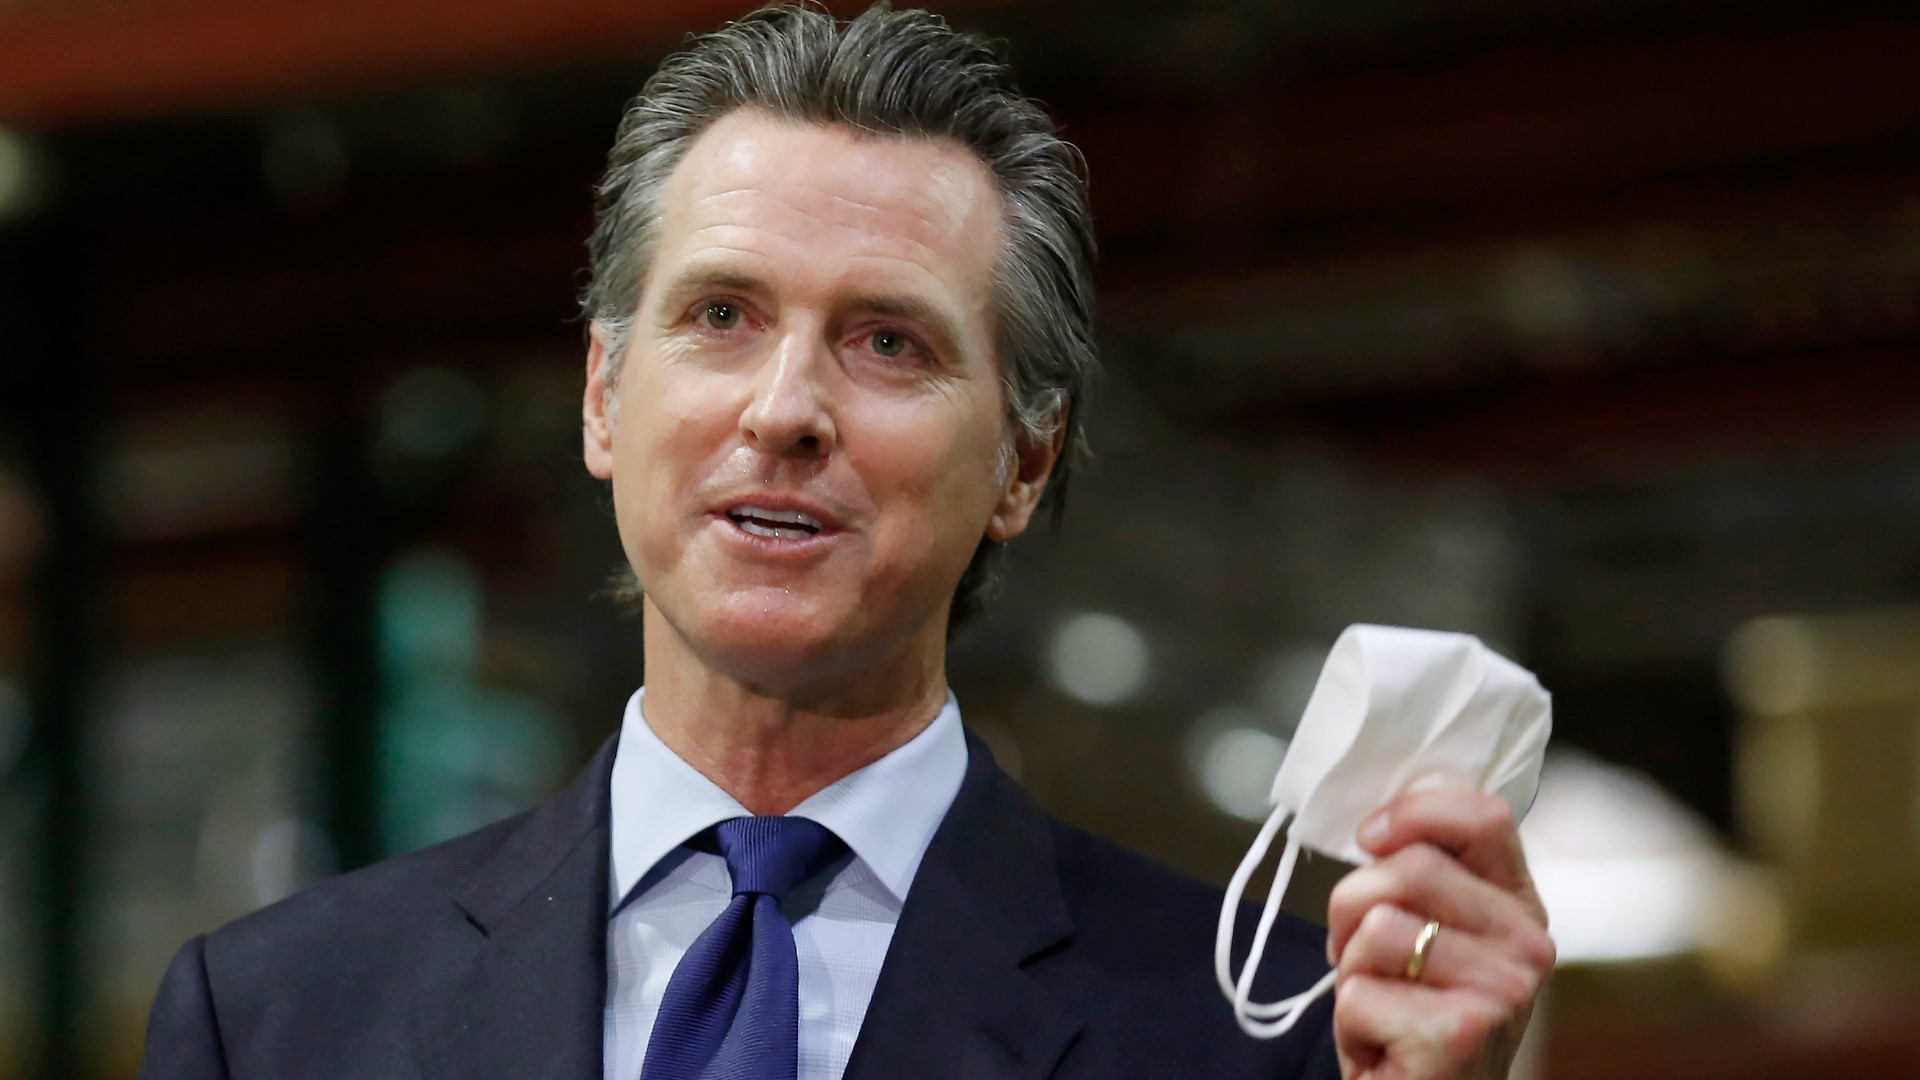 Gavin Newsom moves to establish a vaccine mandate for eligible students after an FDA approval.